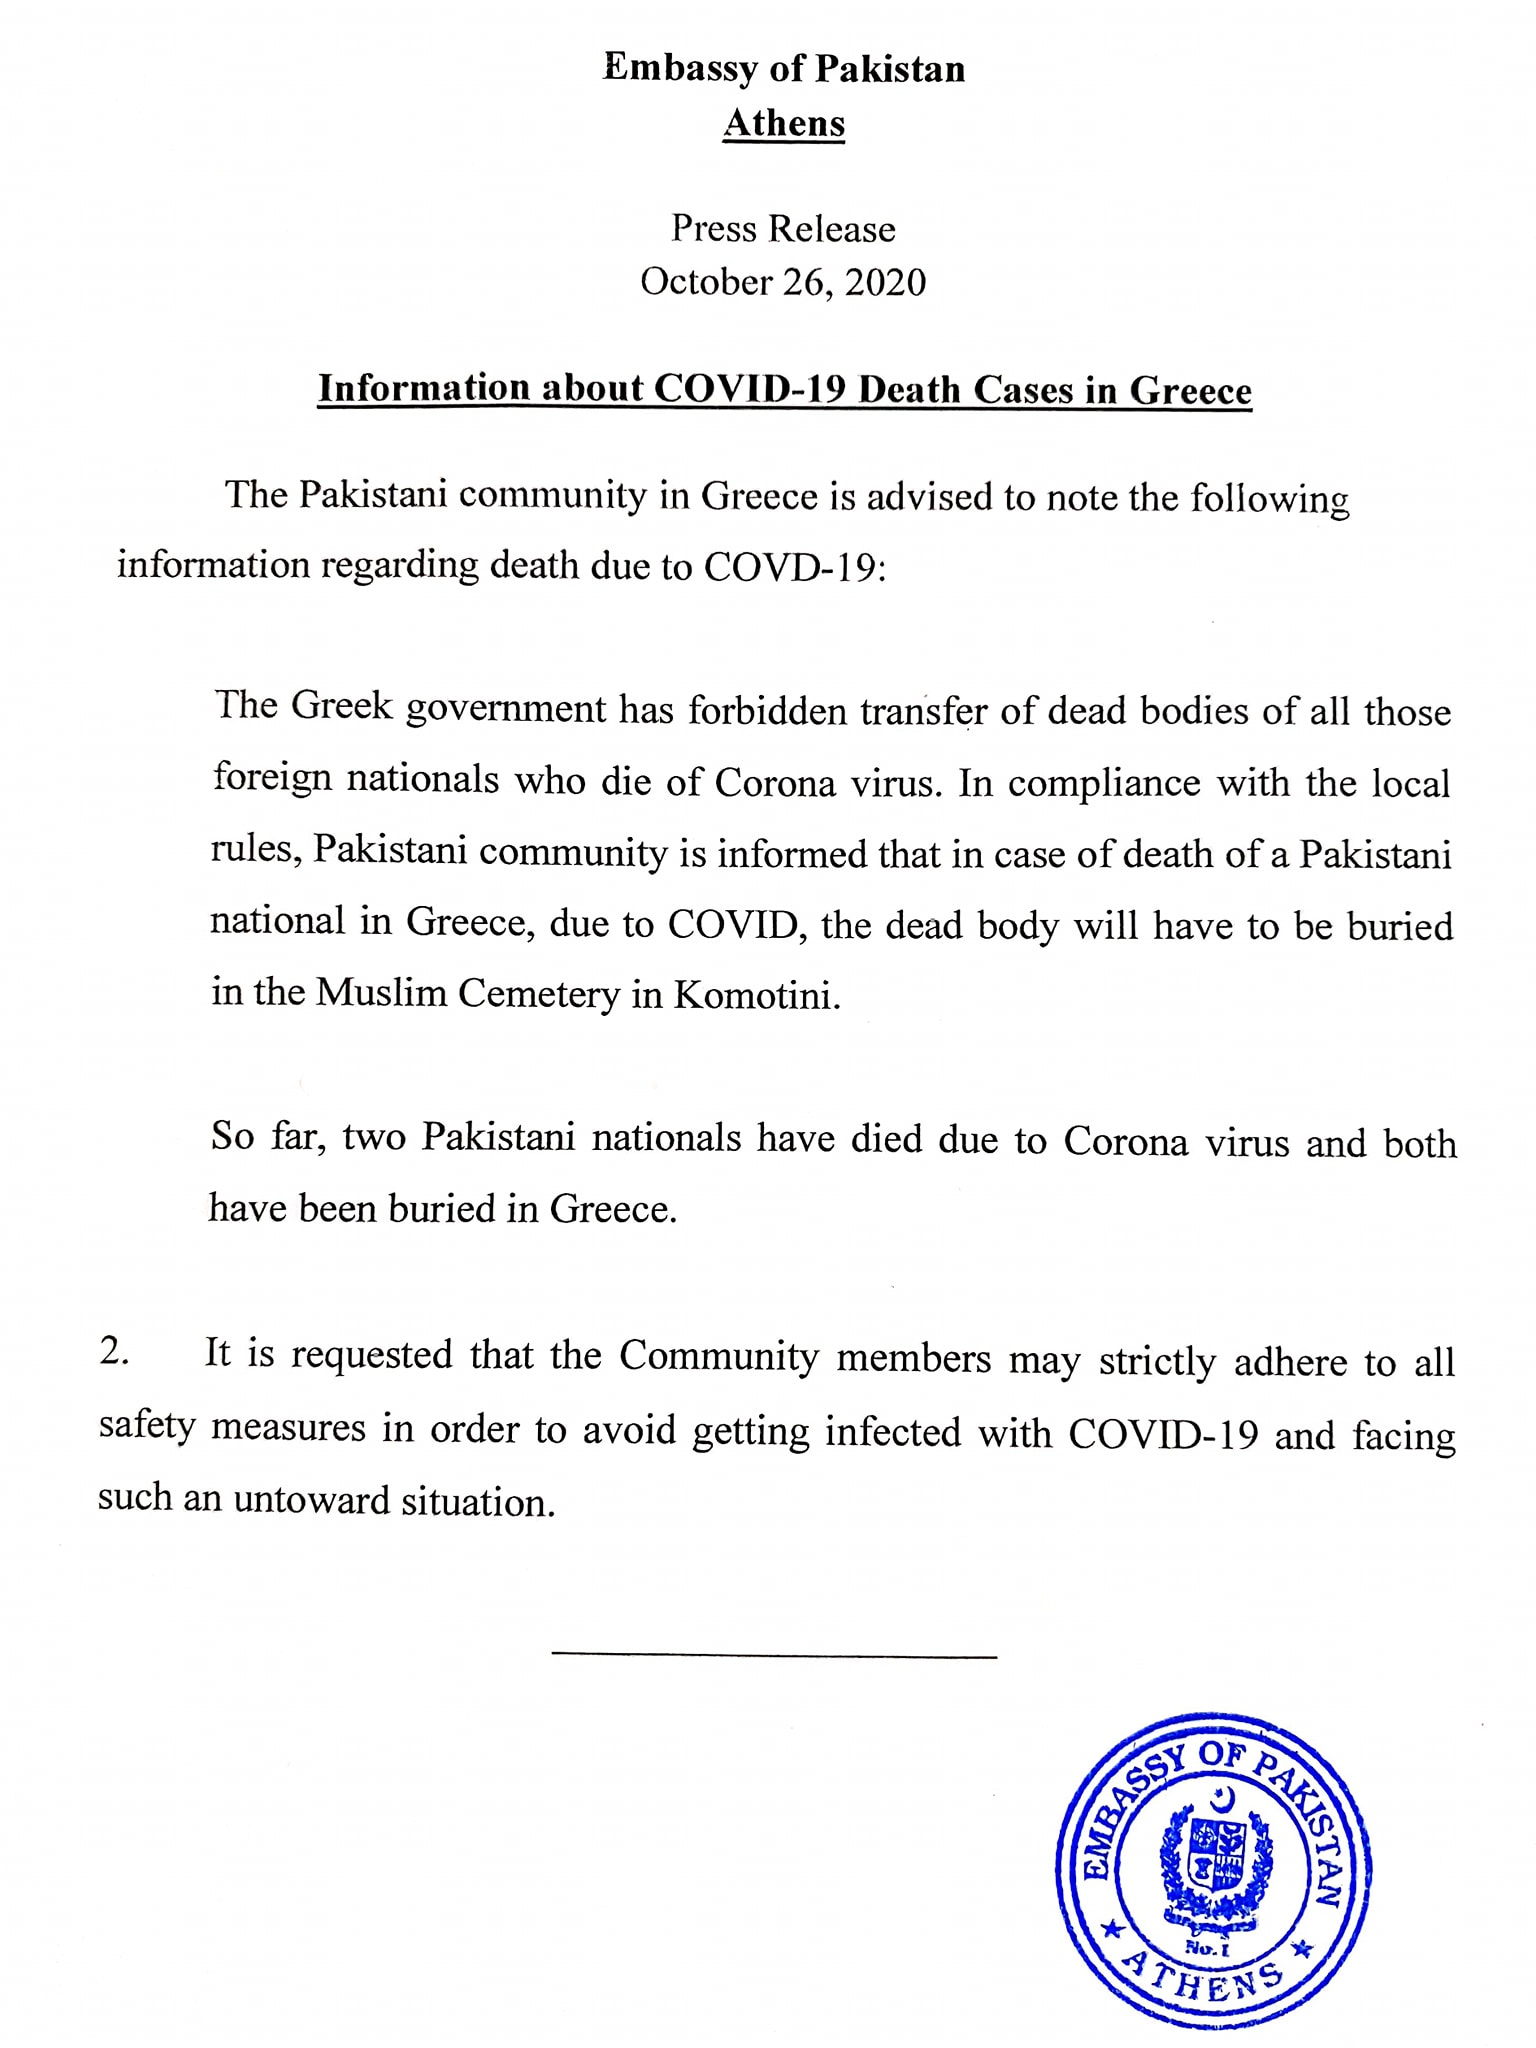 Press Release: Information about COVID-19 Death cases in Greece